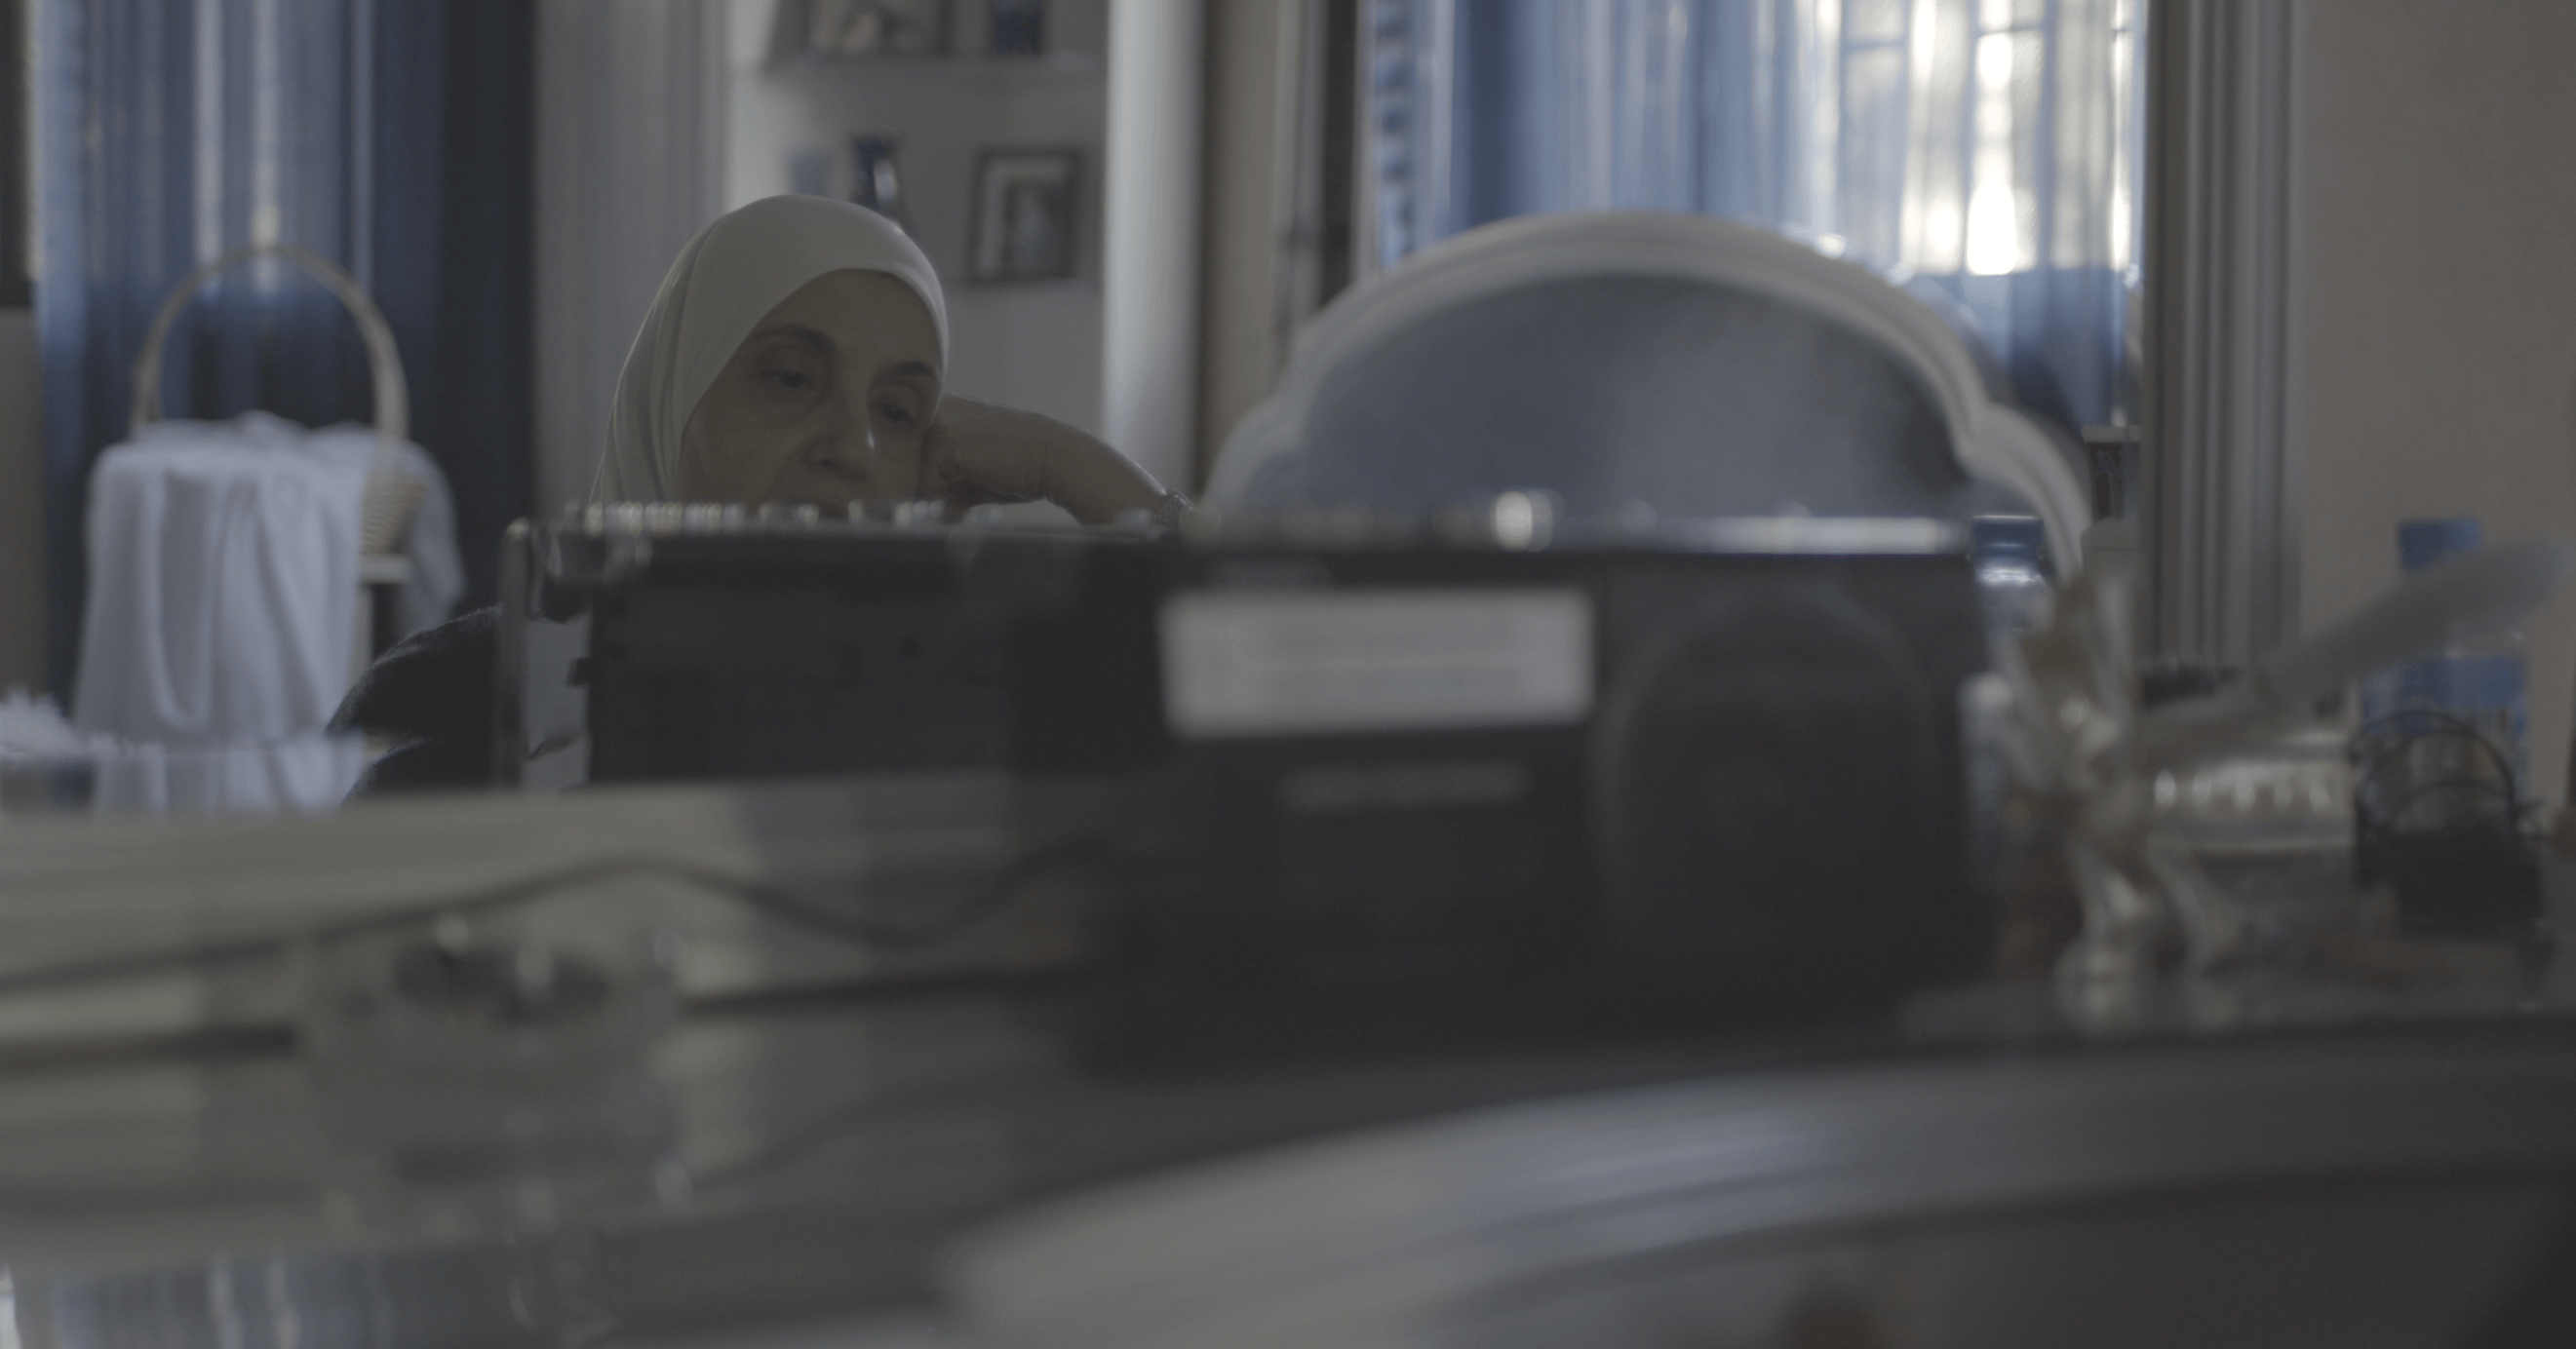 Still from Q. The reflection of a woman wearing a hijab sitting at a desk inside a bedroom with her hand on her face. The reflection of her face is blocked by a small machine sitting on the counter.